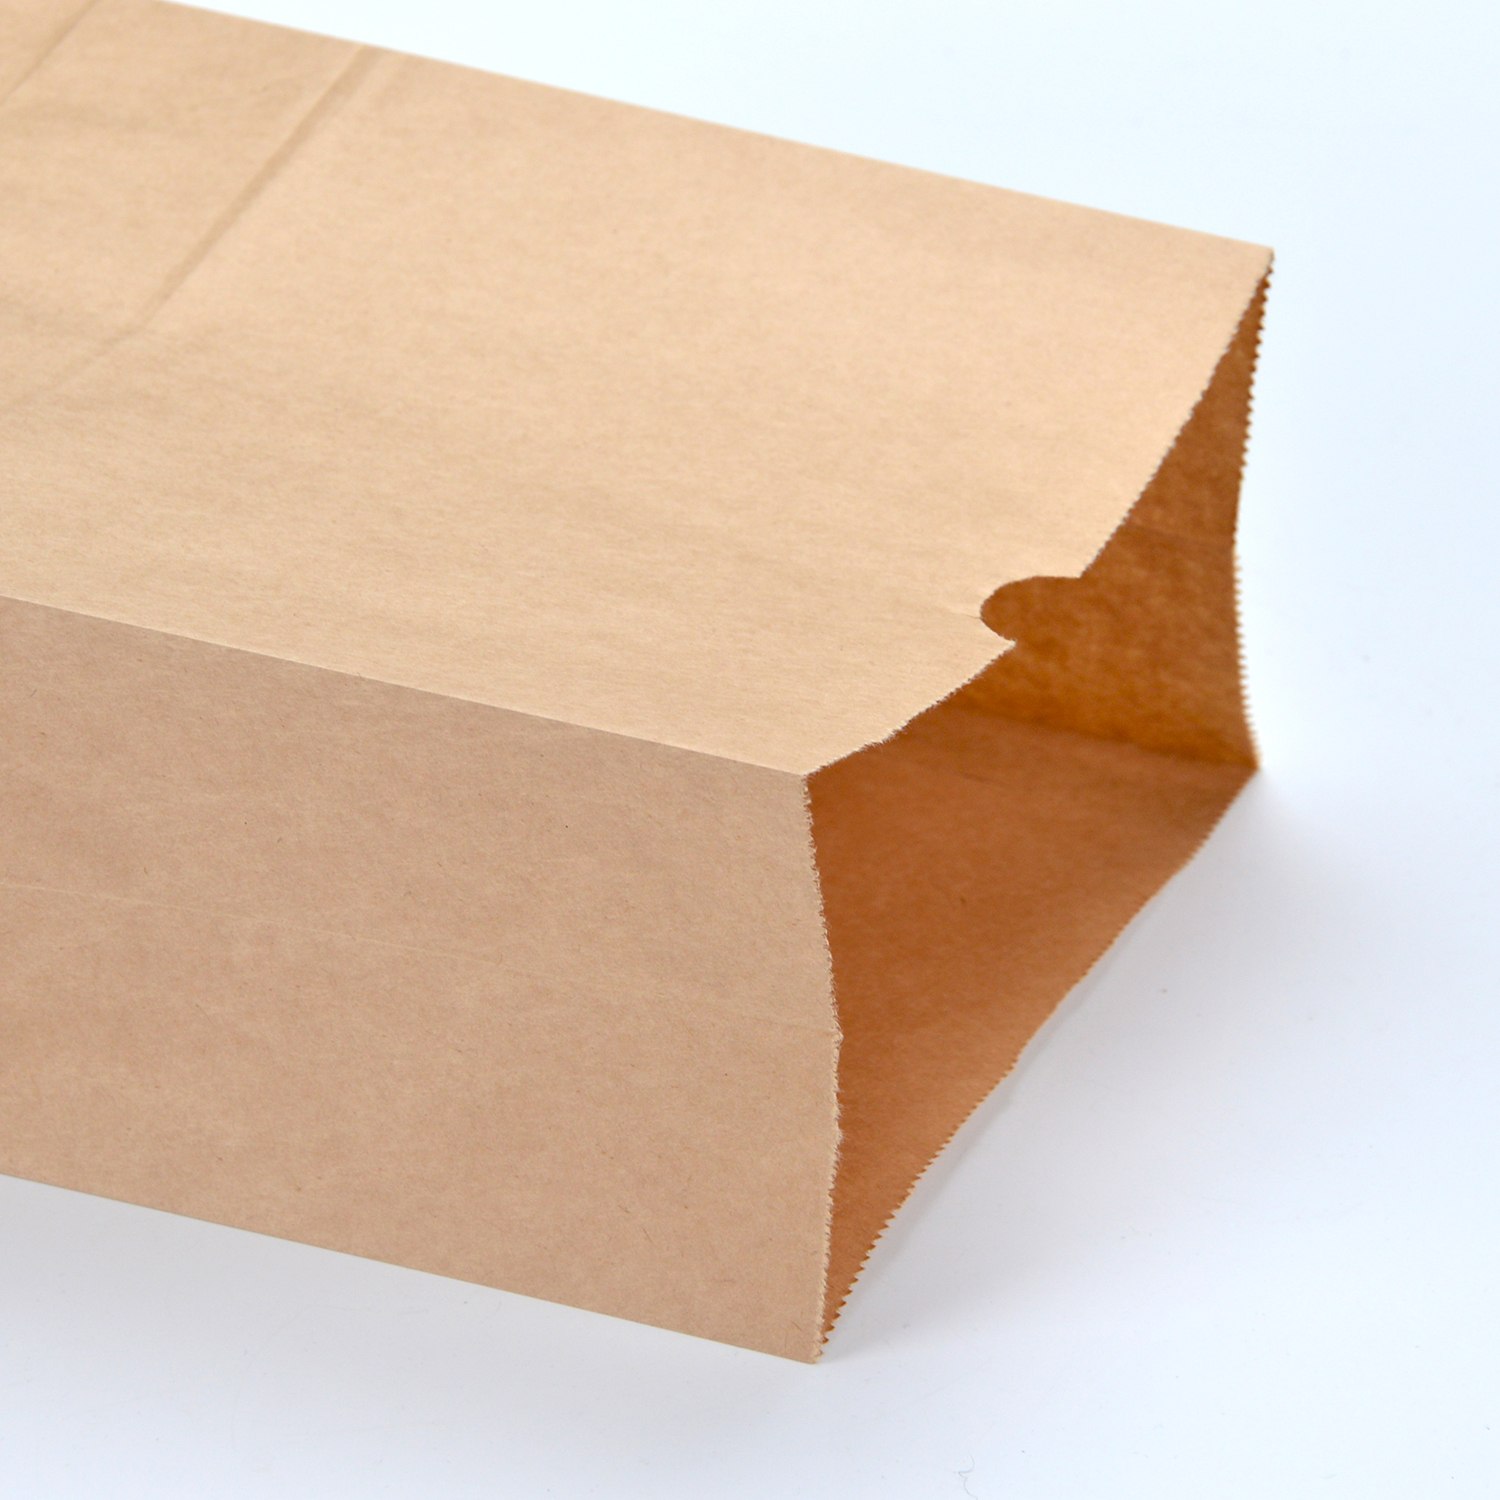 Kraft paper bag with square bottom, no hand-held handle, takeout bag, grocery bag, gift packaging, bread, hamburger packaging, paper bag